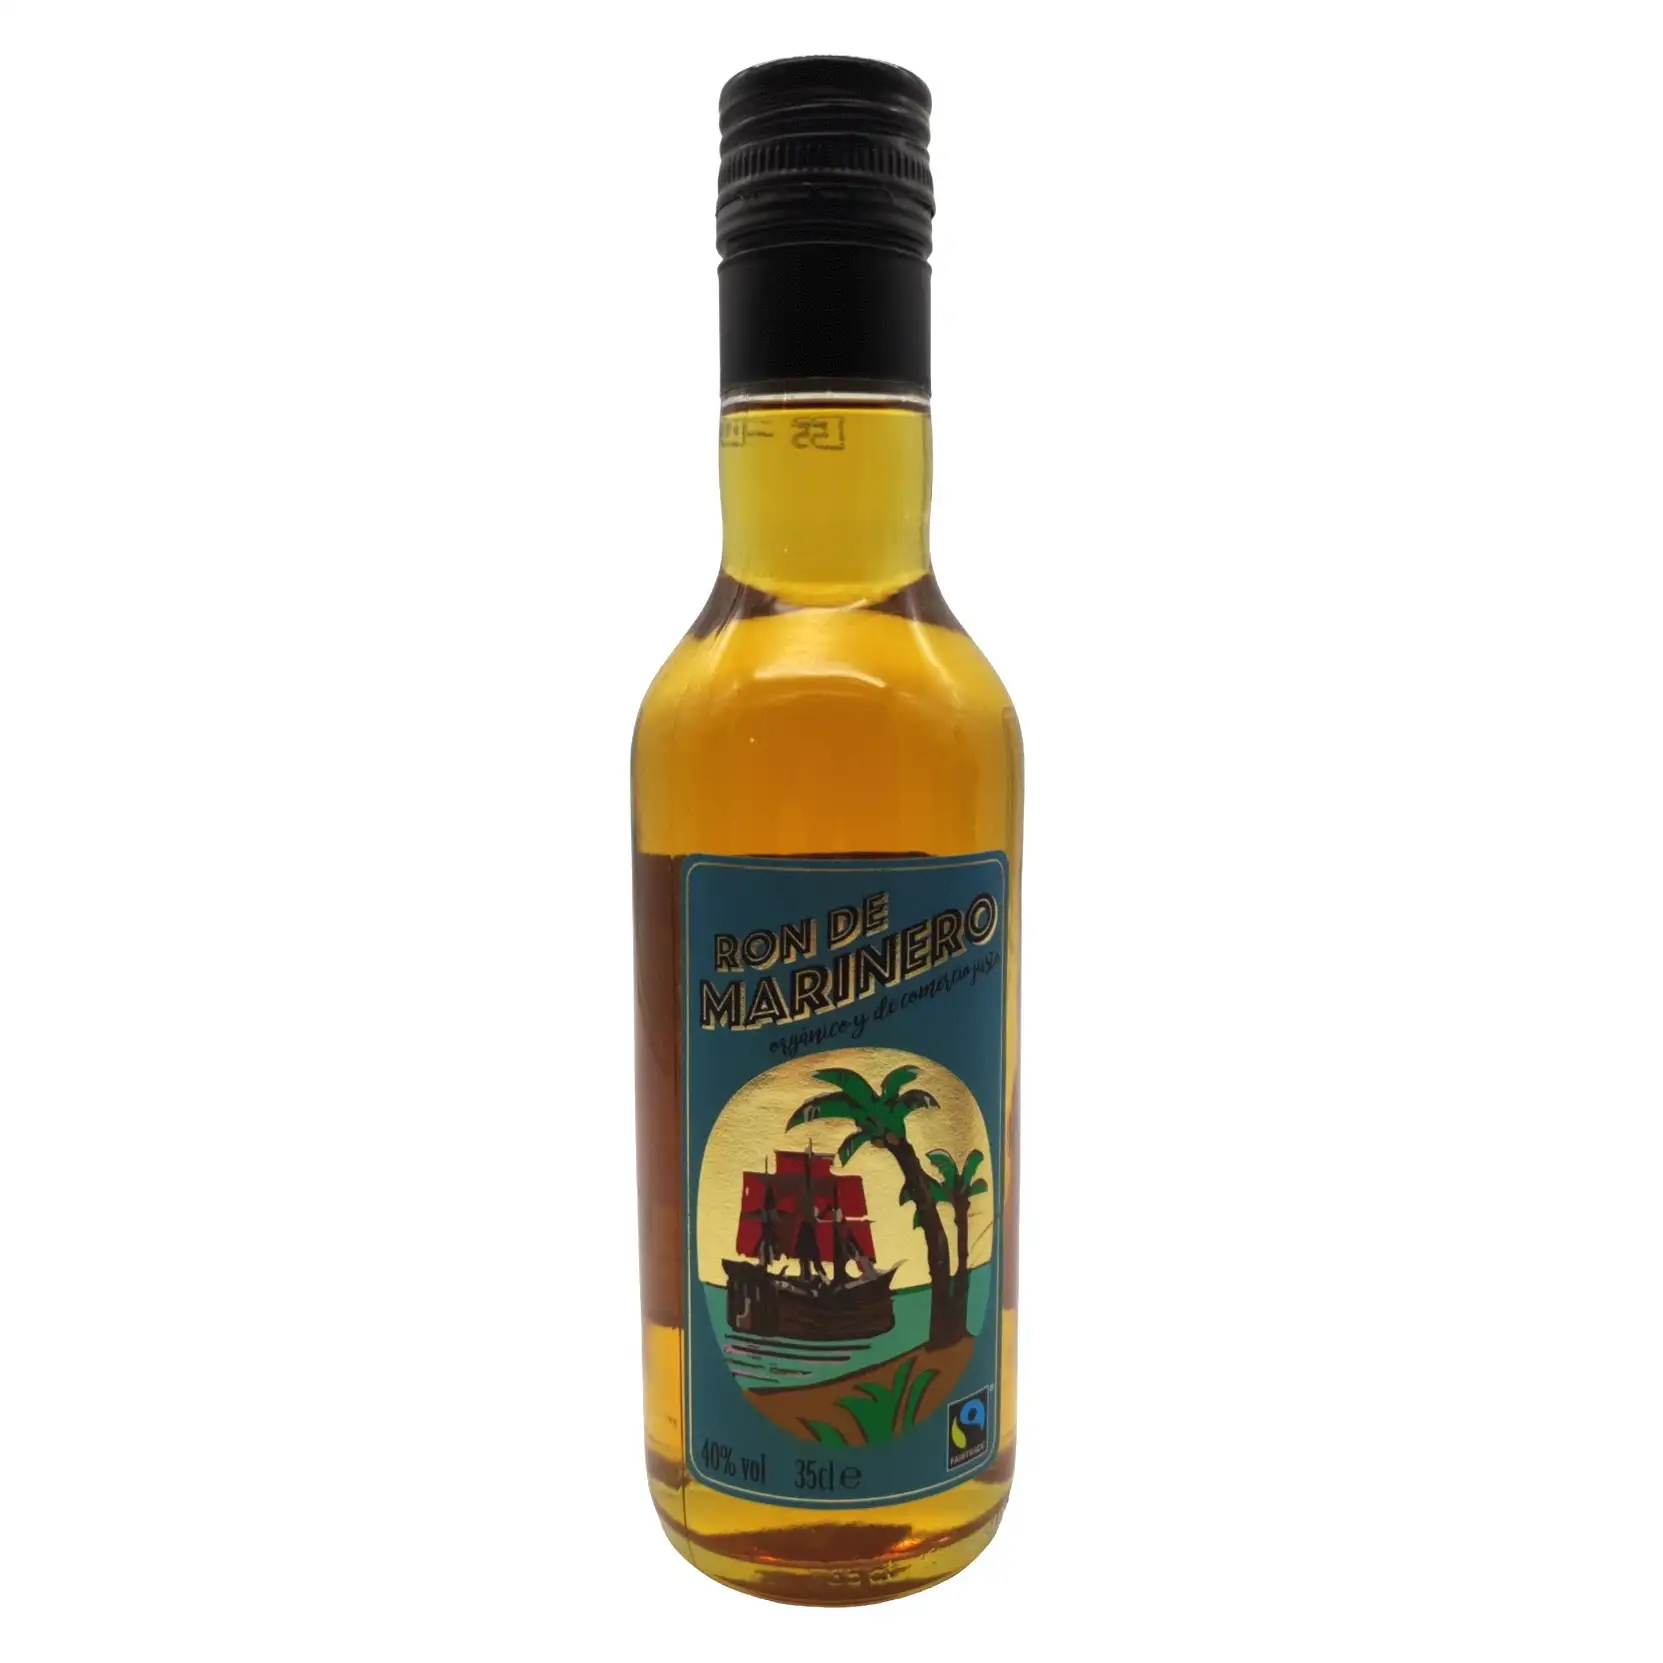 Image of the front of the bottle of the rum Ron de Marinero